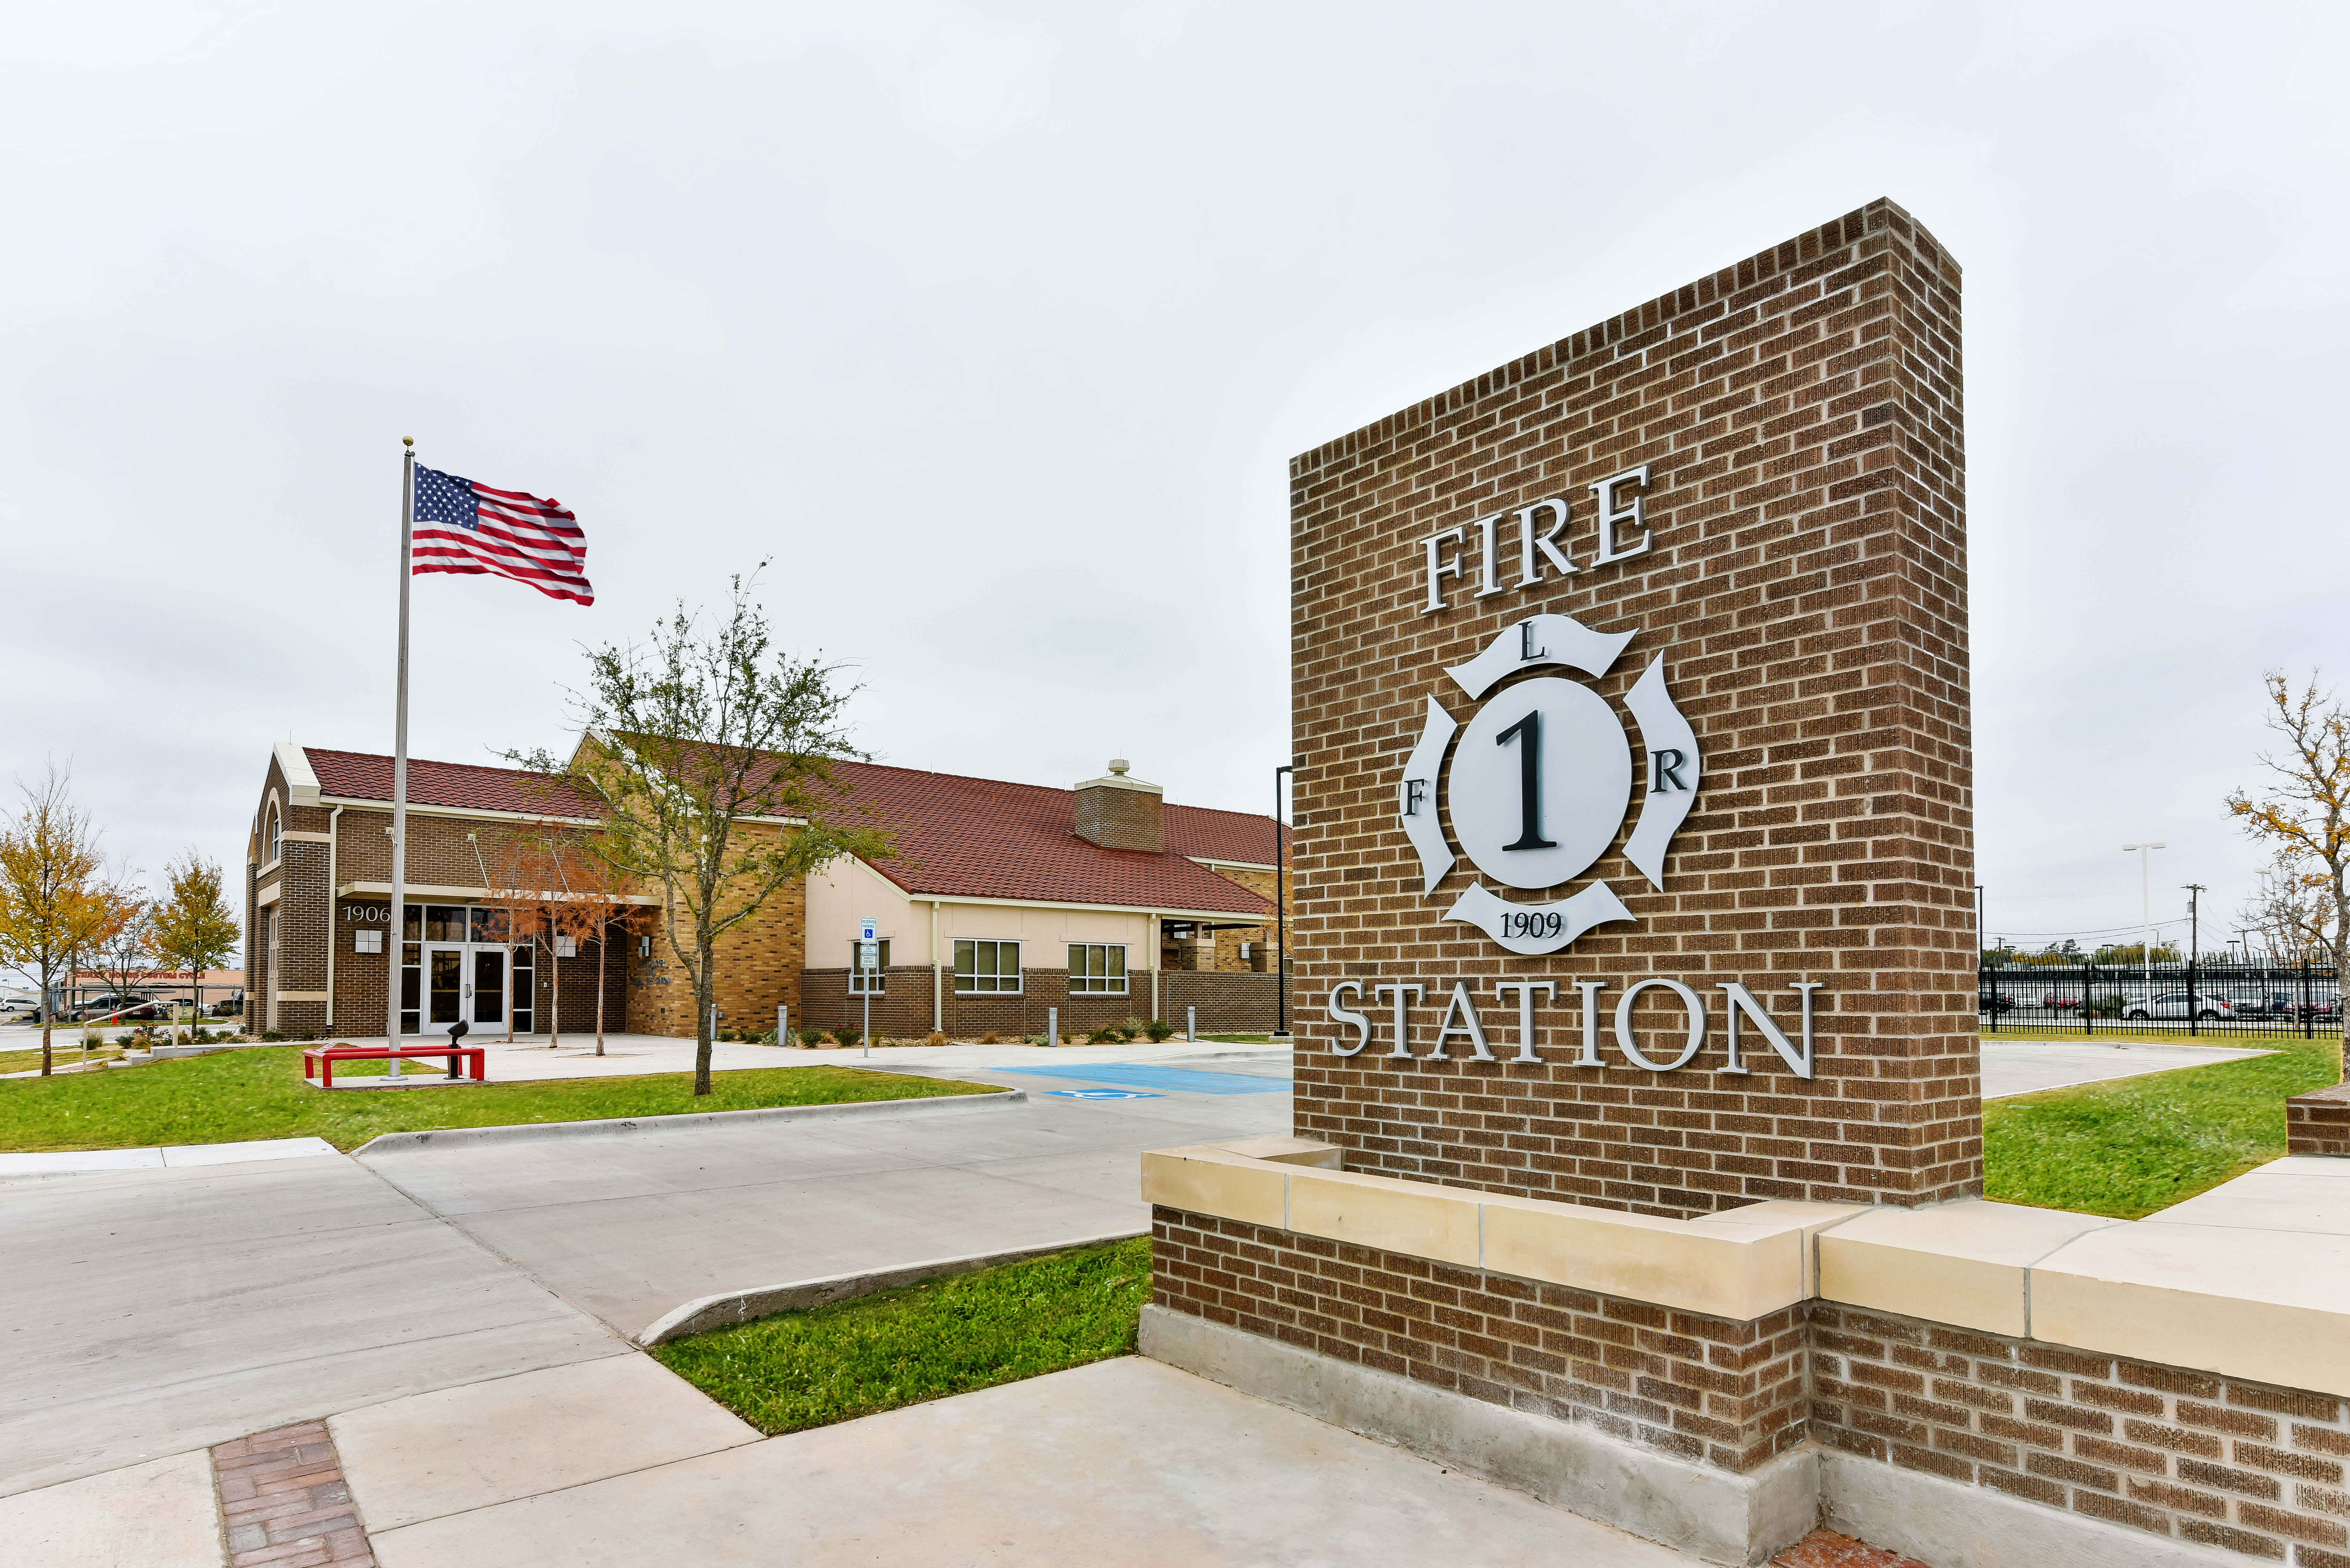  City of Lubbock | Fire Station No. 1 category